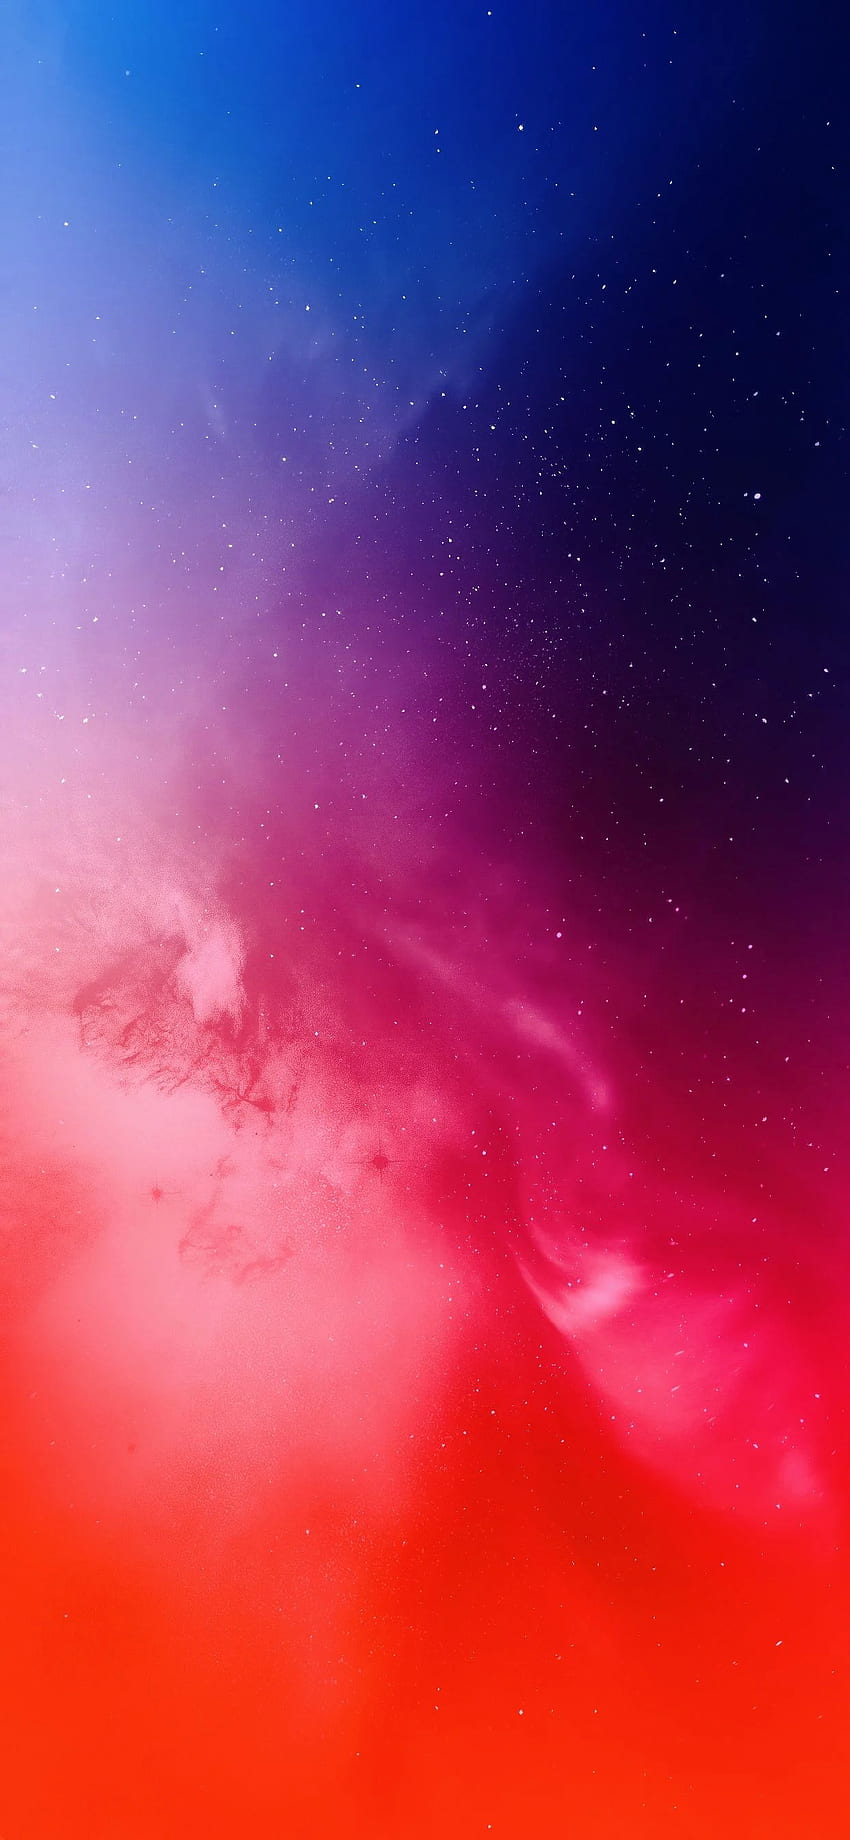 Space fantasy for iPhone, Red Space iPhone HD phone wallpaper